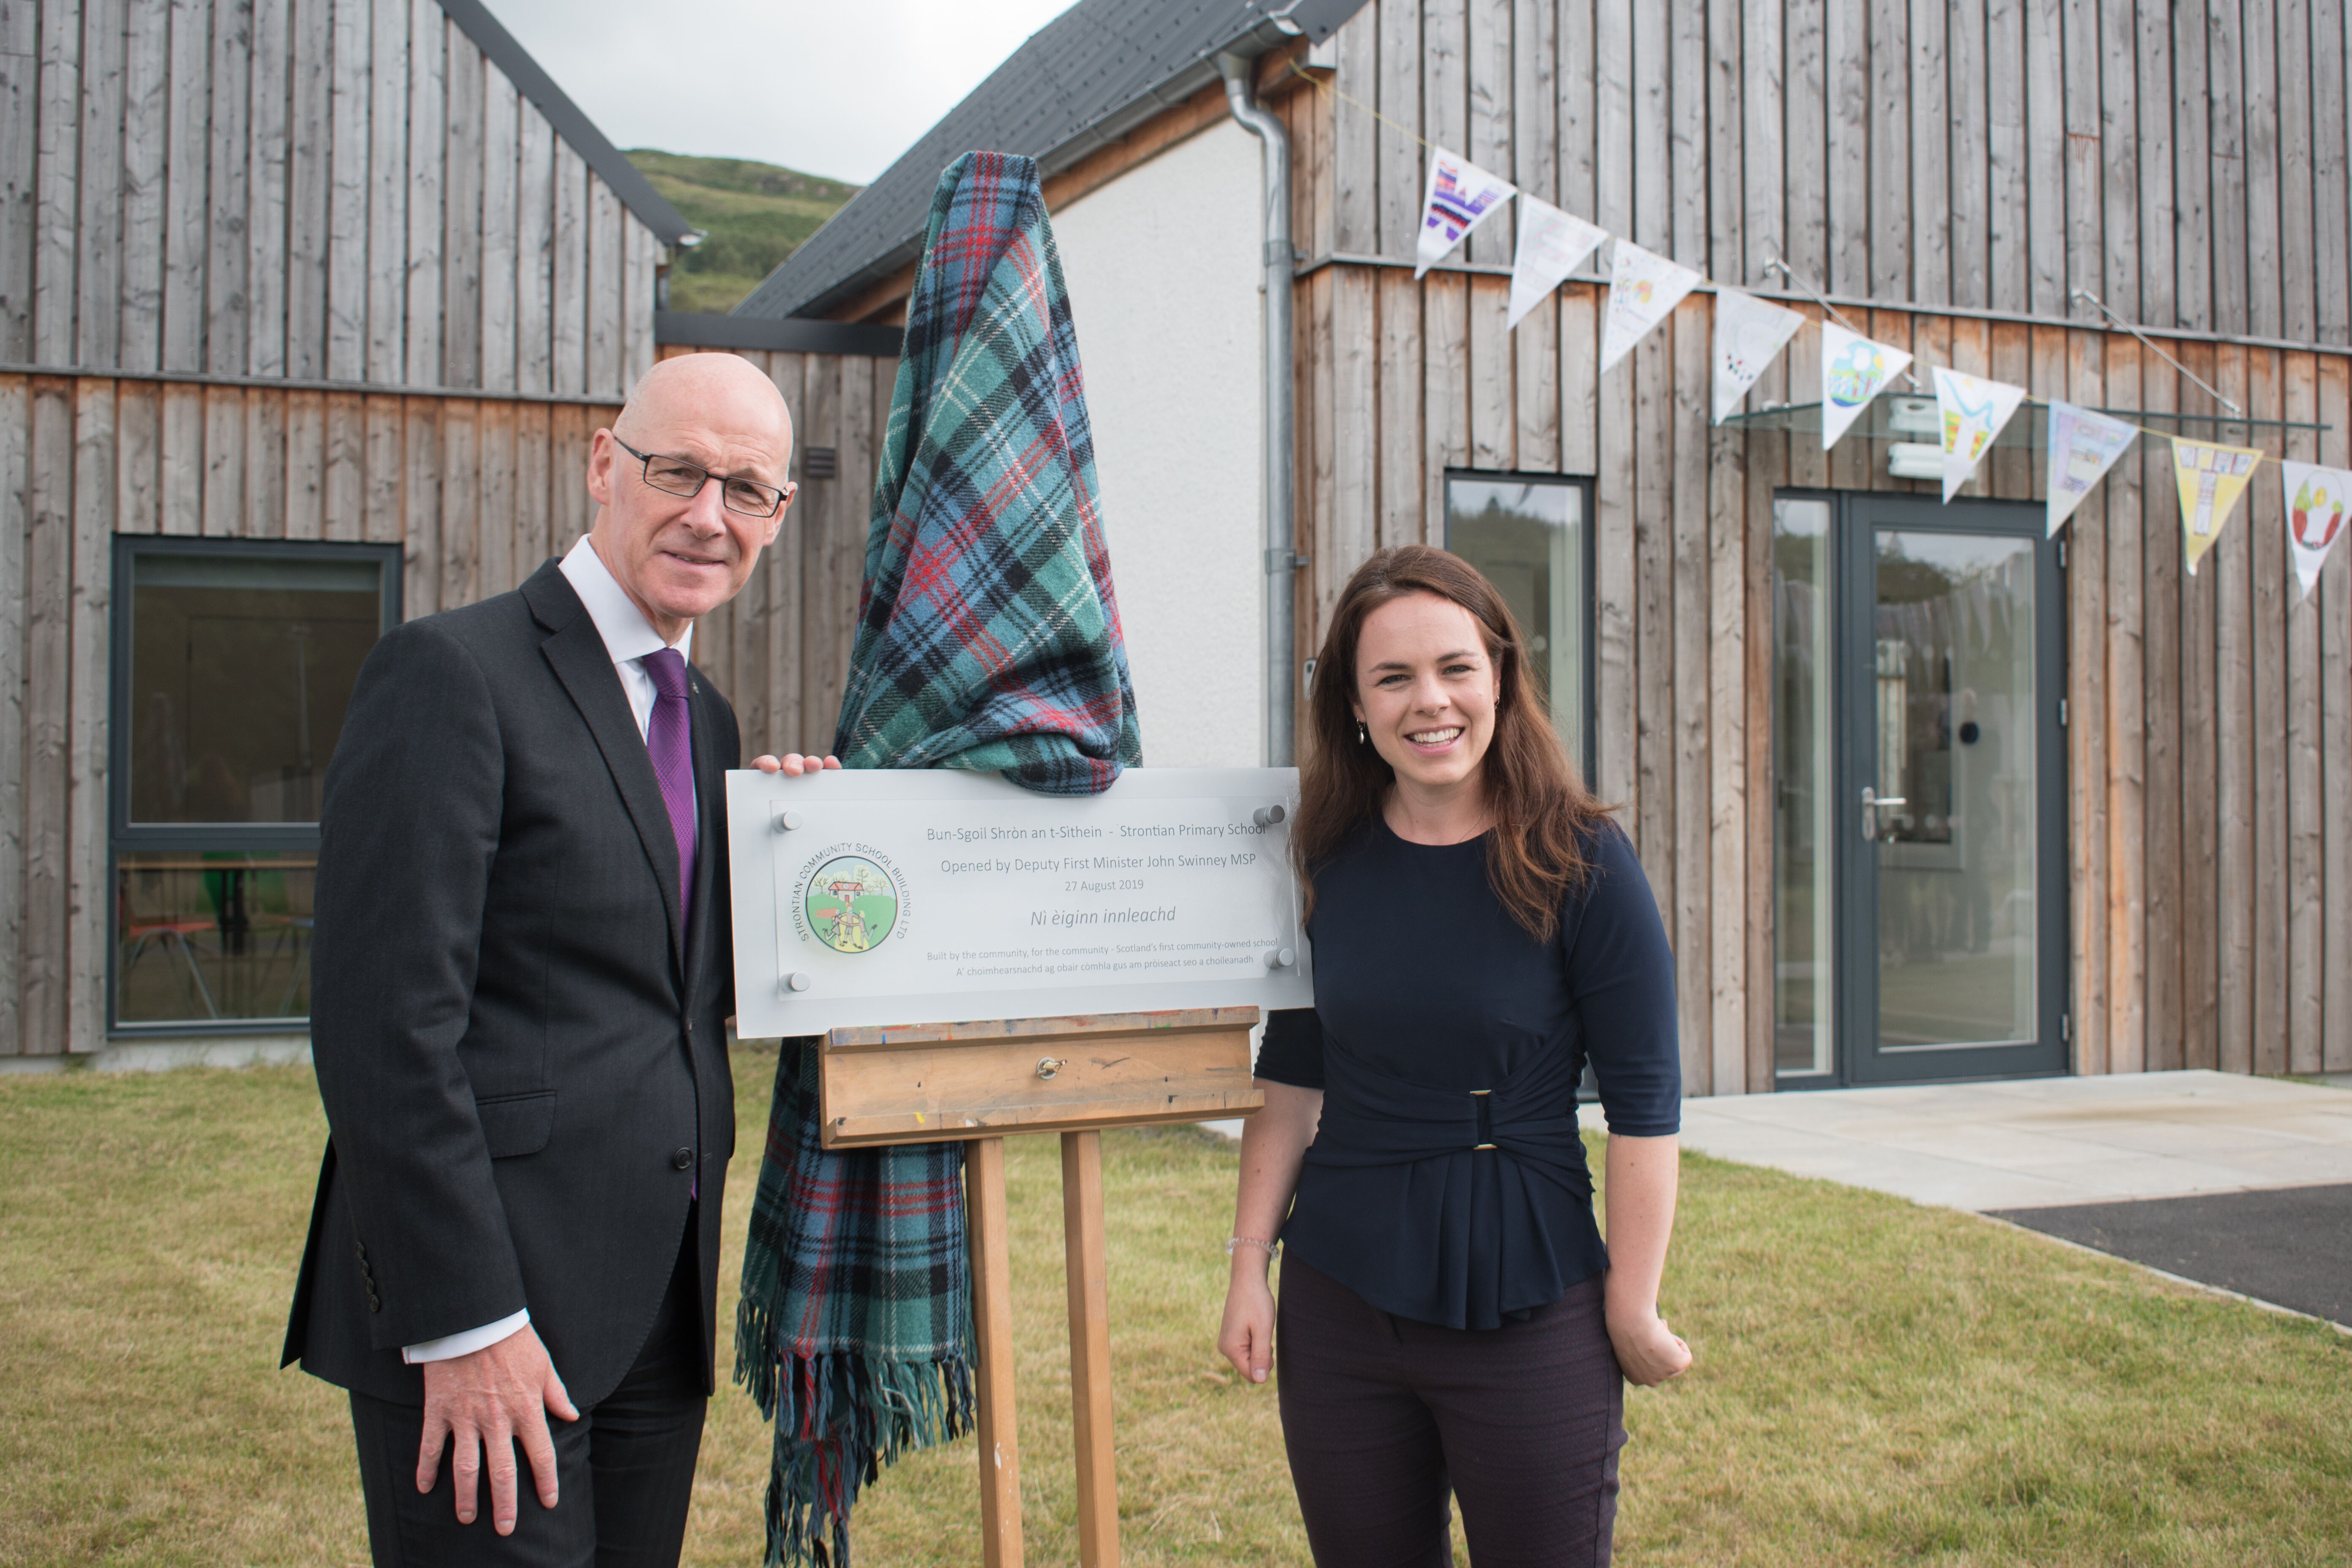 Deputy First Minister John Swinney with local MSP Kate Forbes at the official opening of Strontian Primary School.